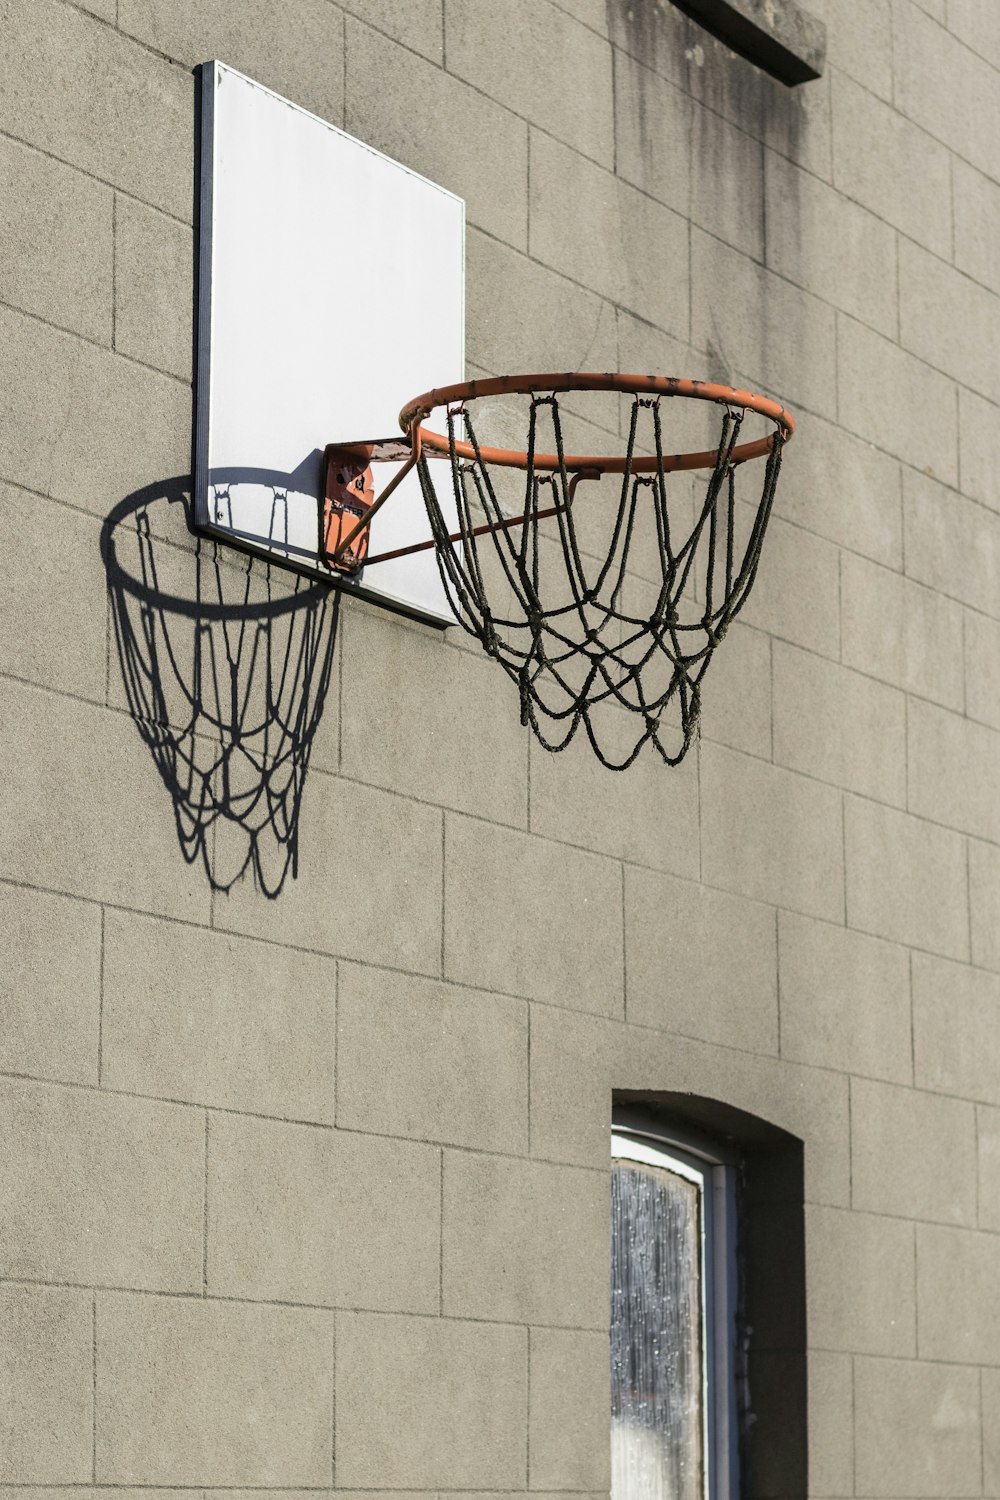 a basketball hoop hanging from the side of a building